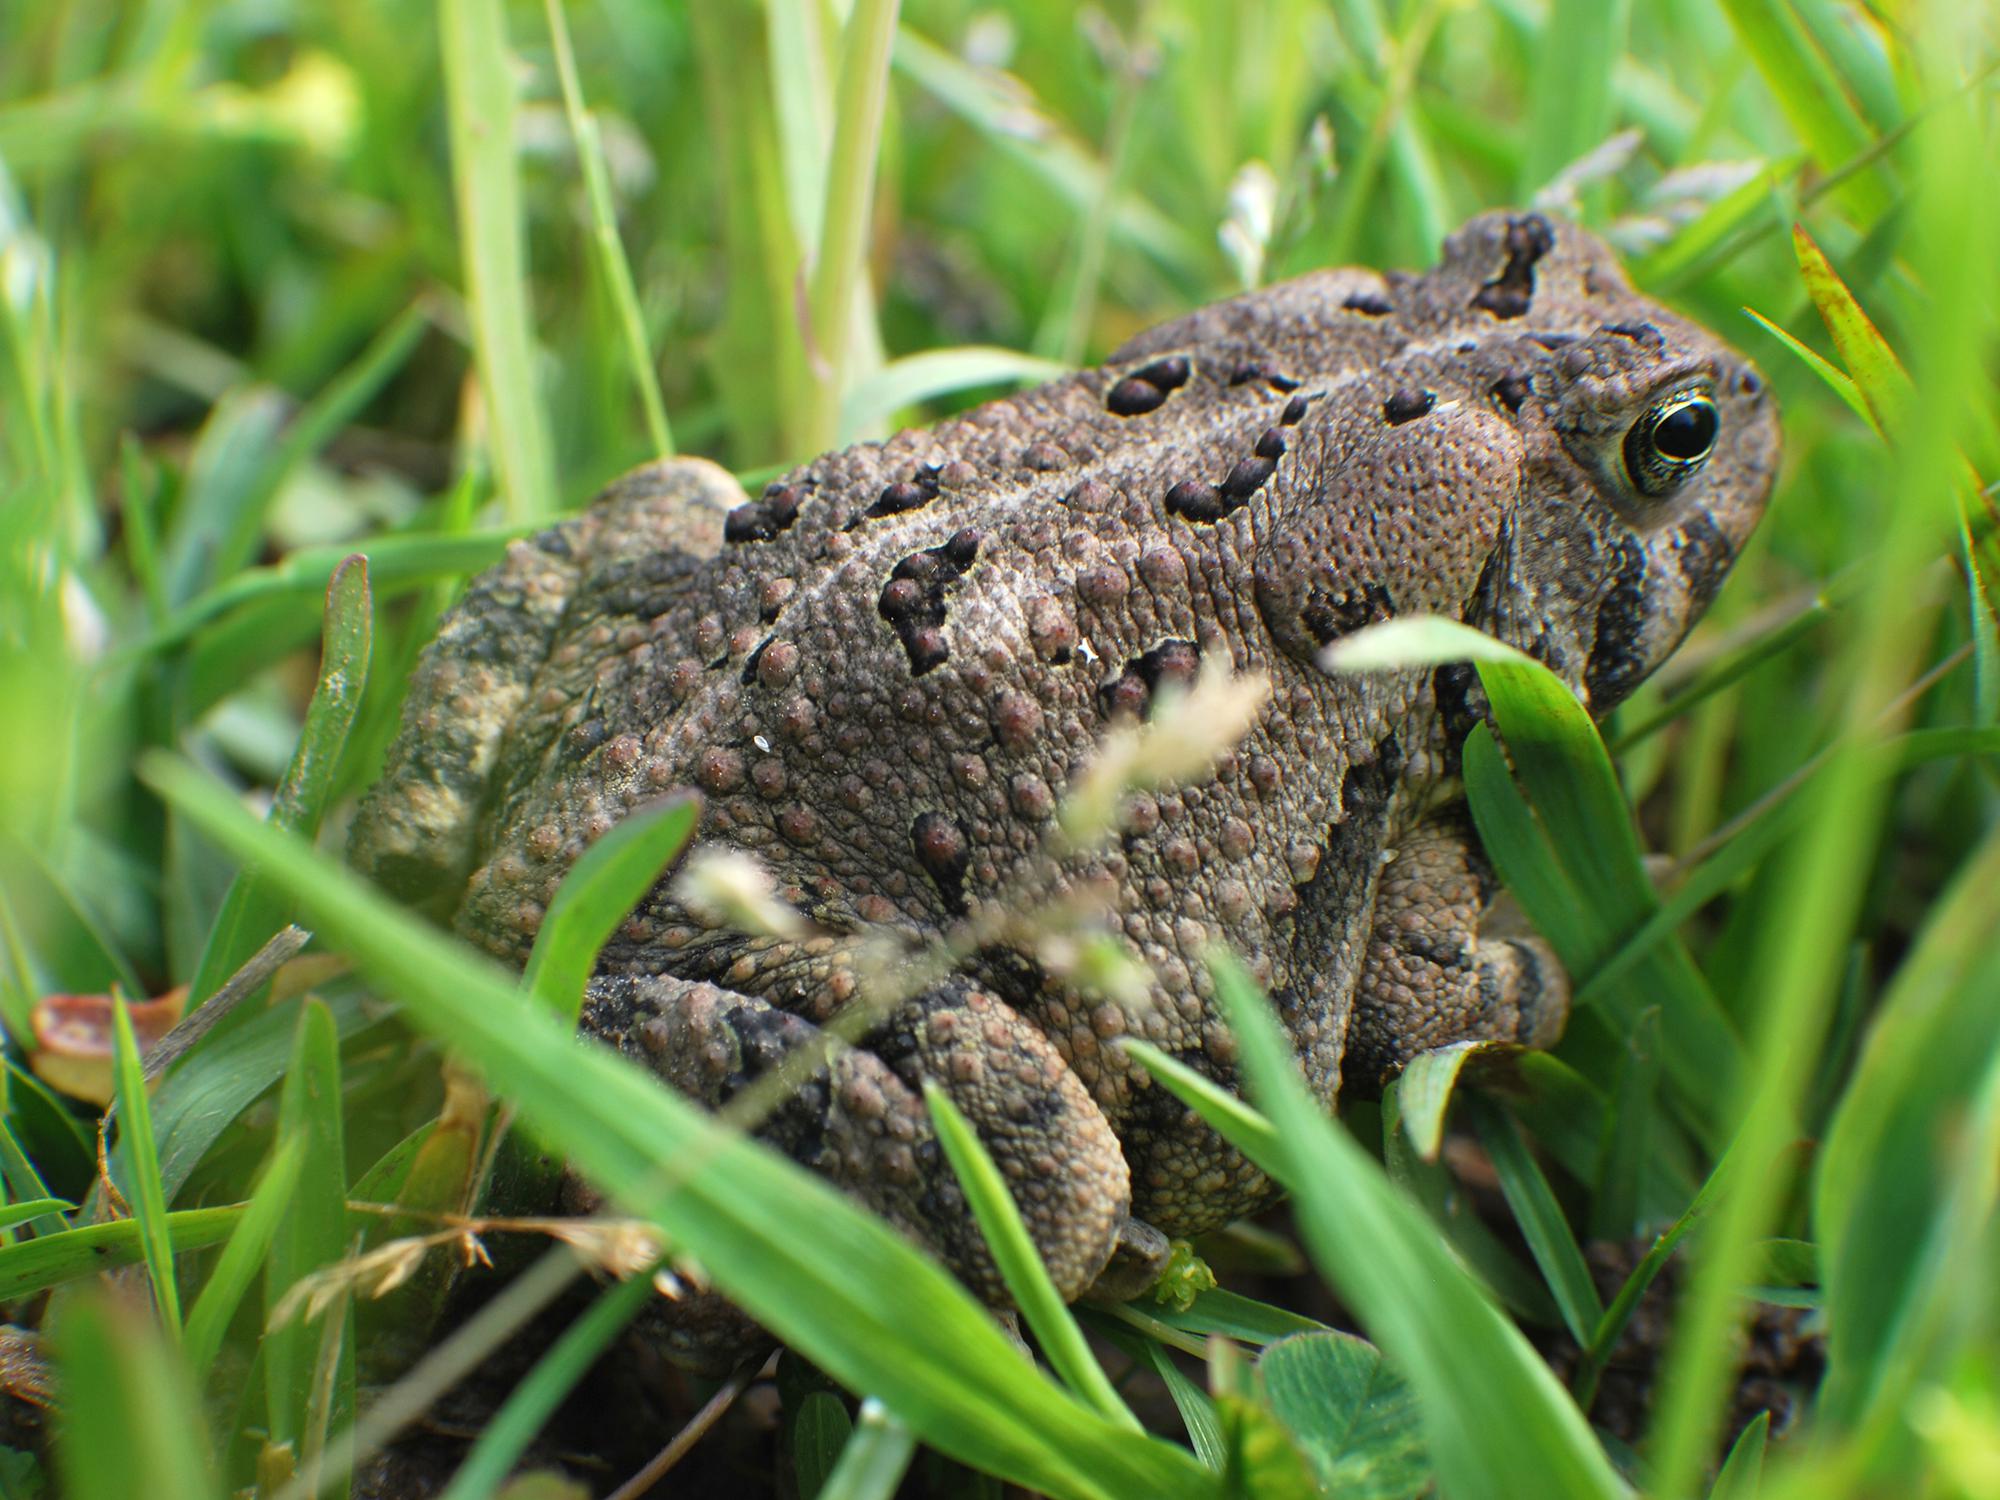 Contrary to popular belief, handling toads does not cause warts. (Photo courtesy of Evan O'Donnell)